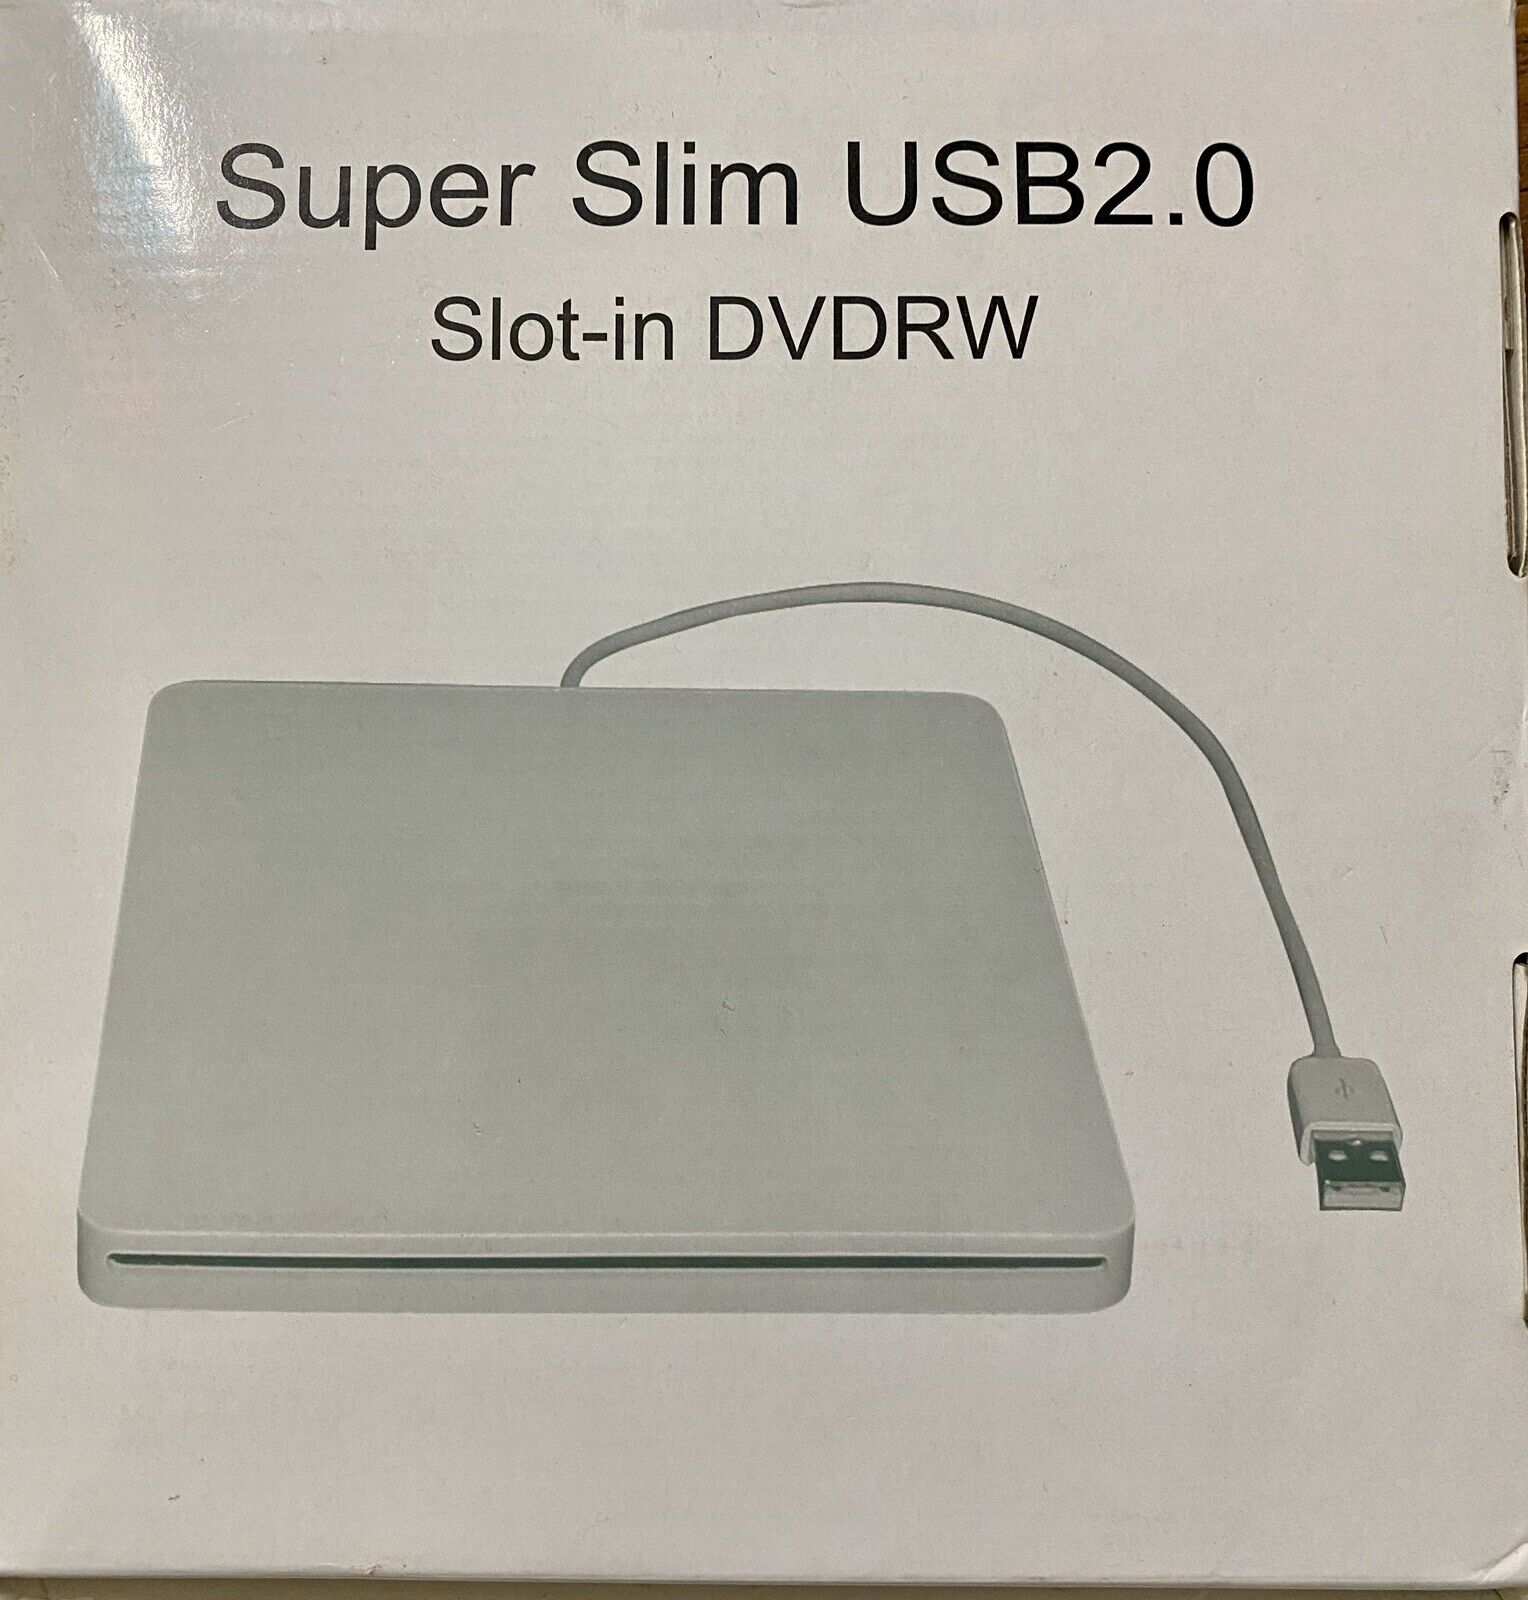 Super Slim USB 2.0 Slot-in DVDRW External for Mac or PC Brand New Packaging